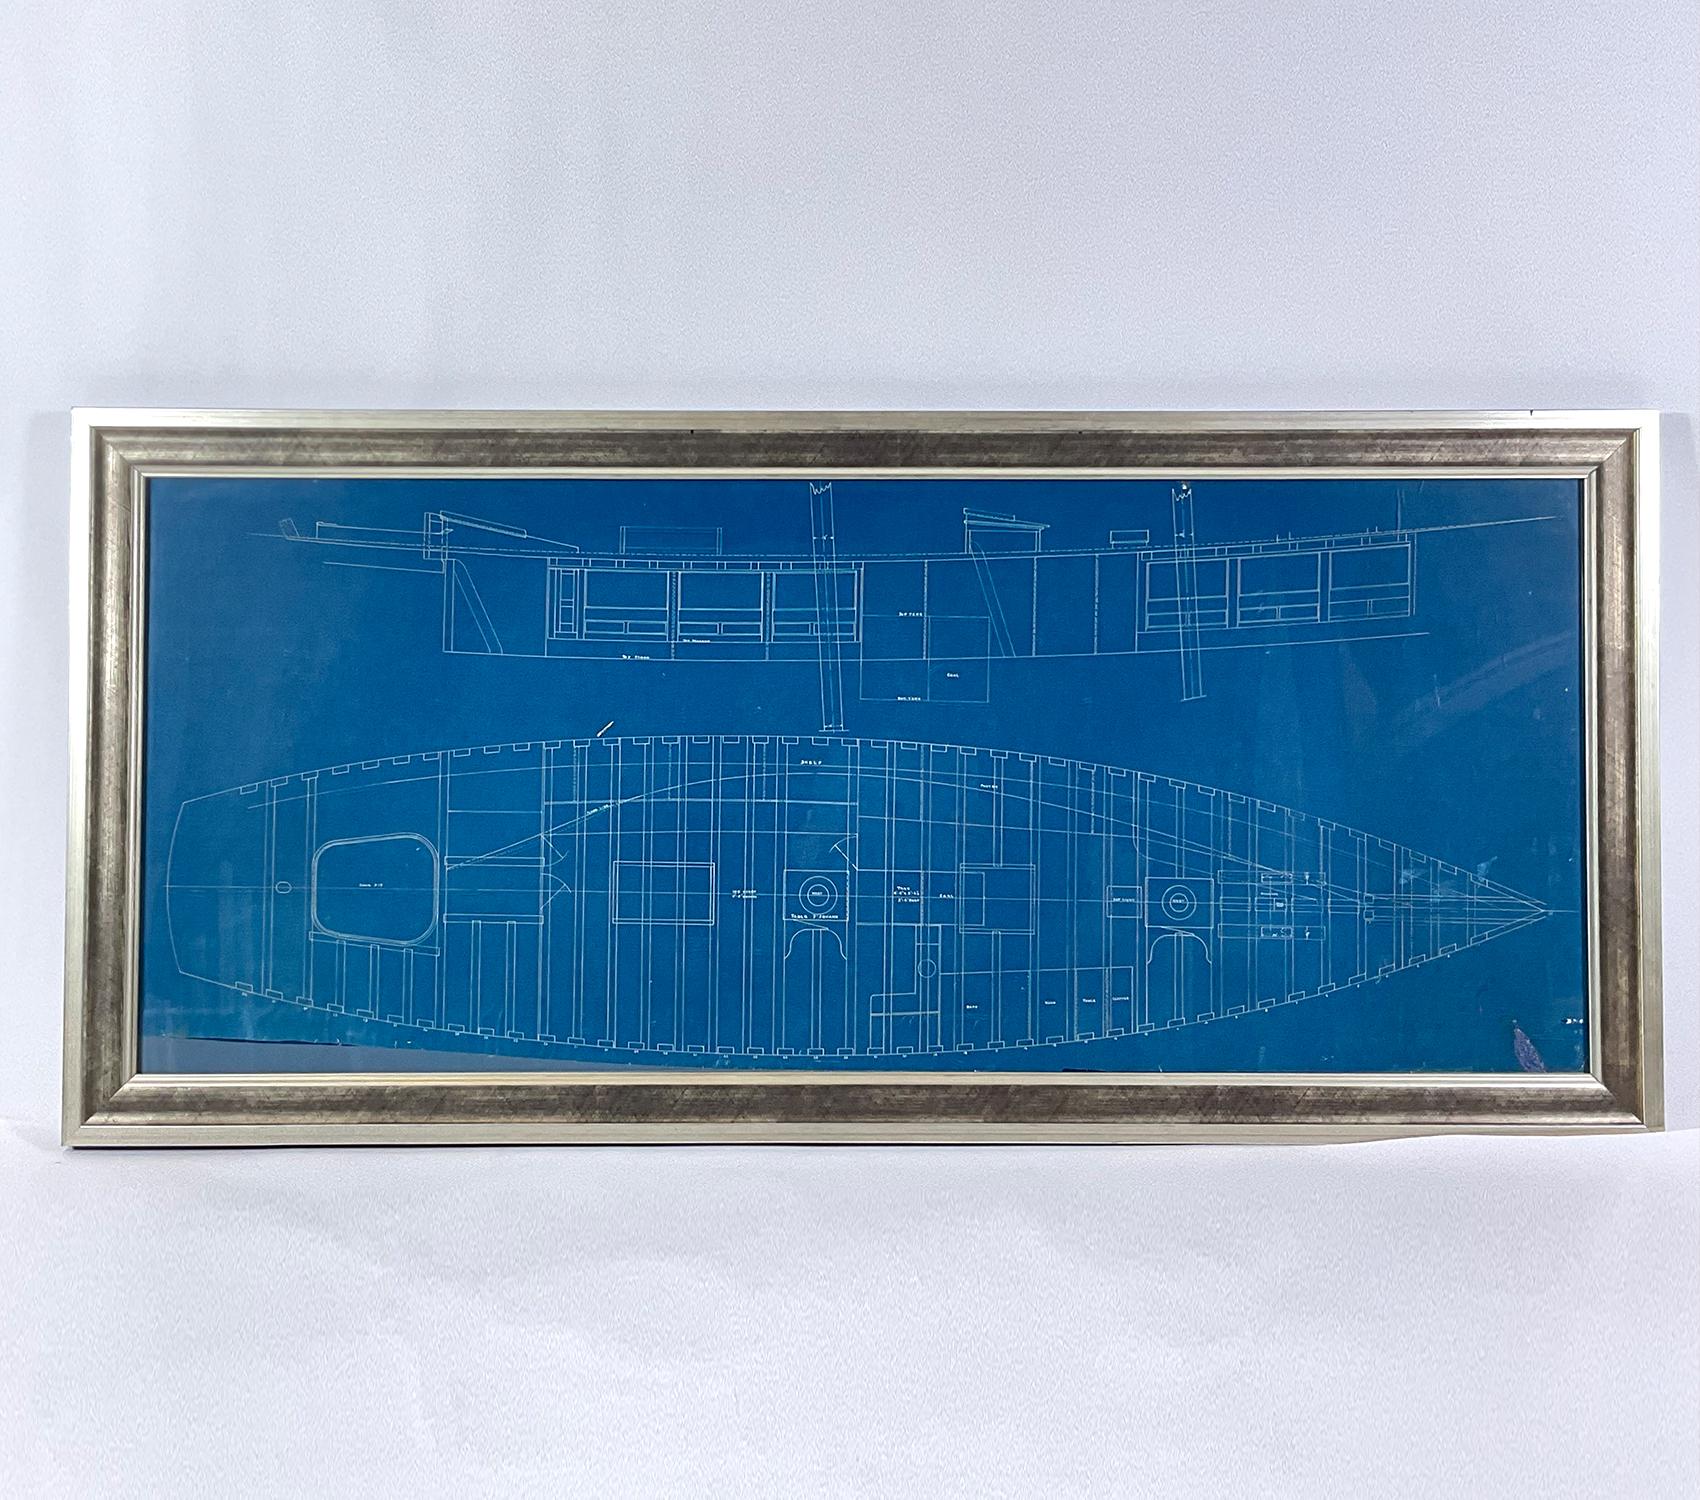 Framed architect's drawing noted as 